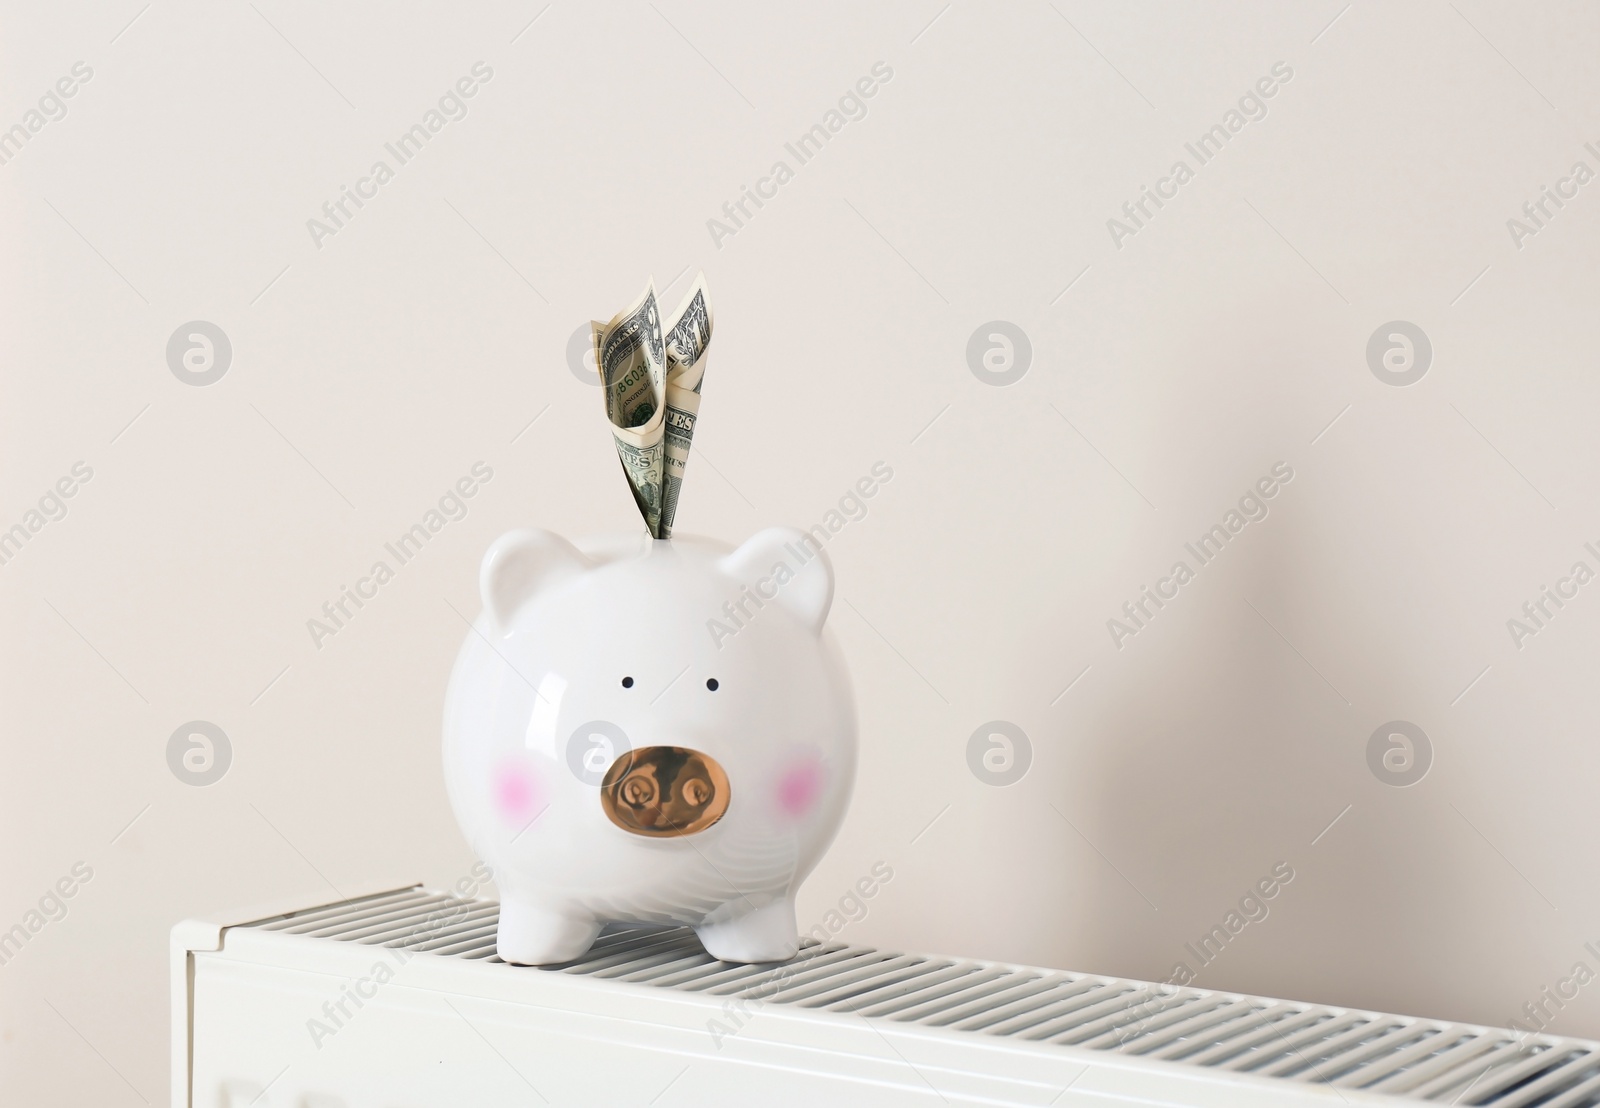 Photo of Piggy bank with money on heating radiator against light background